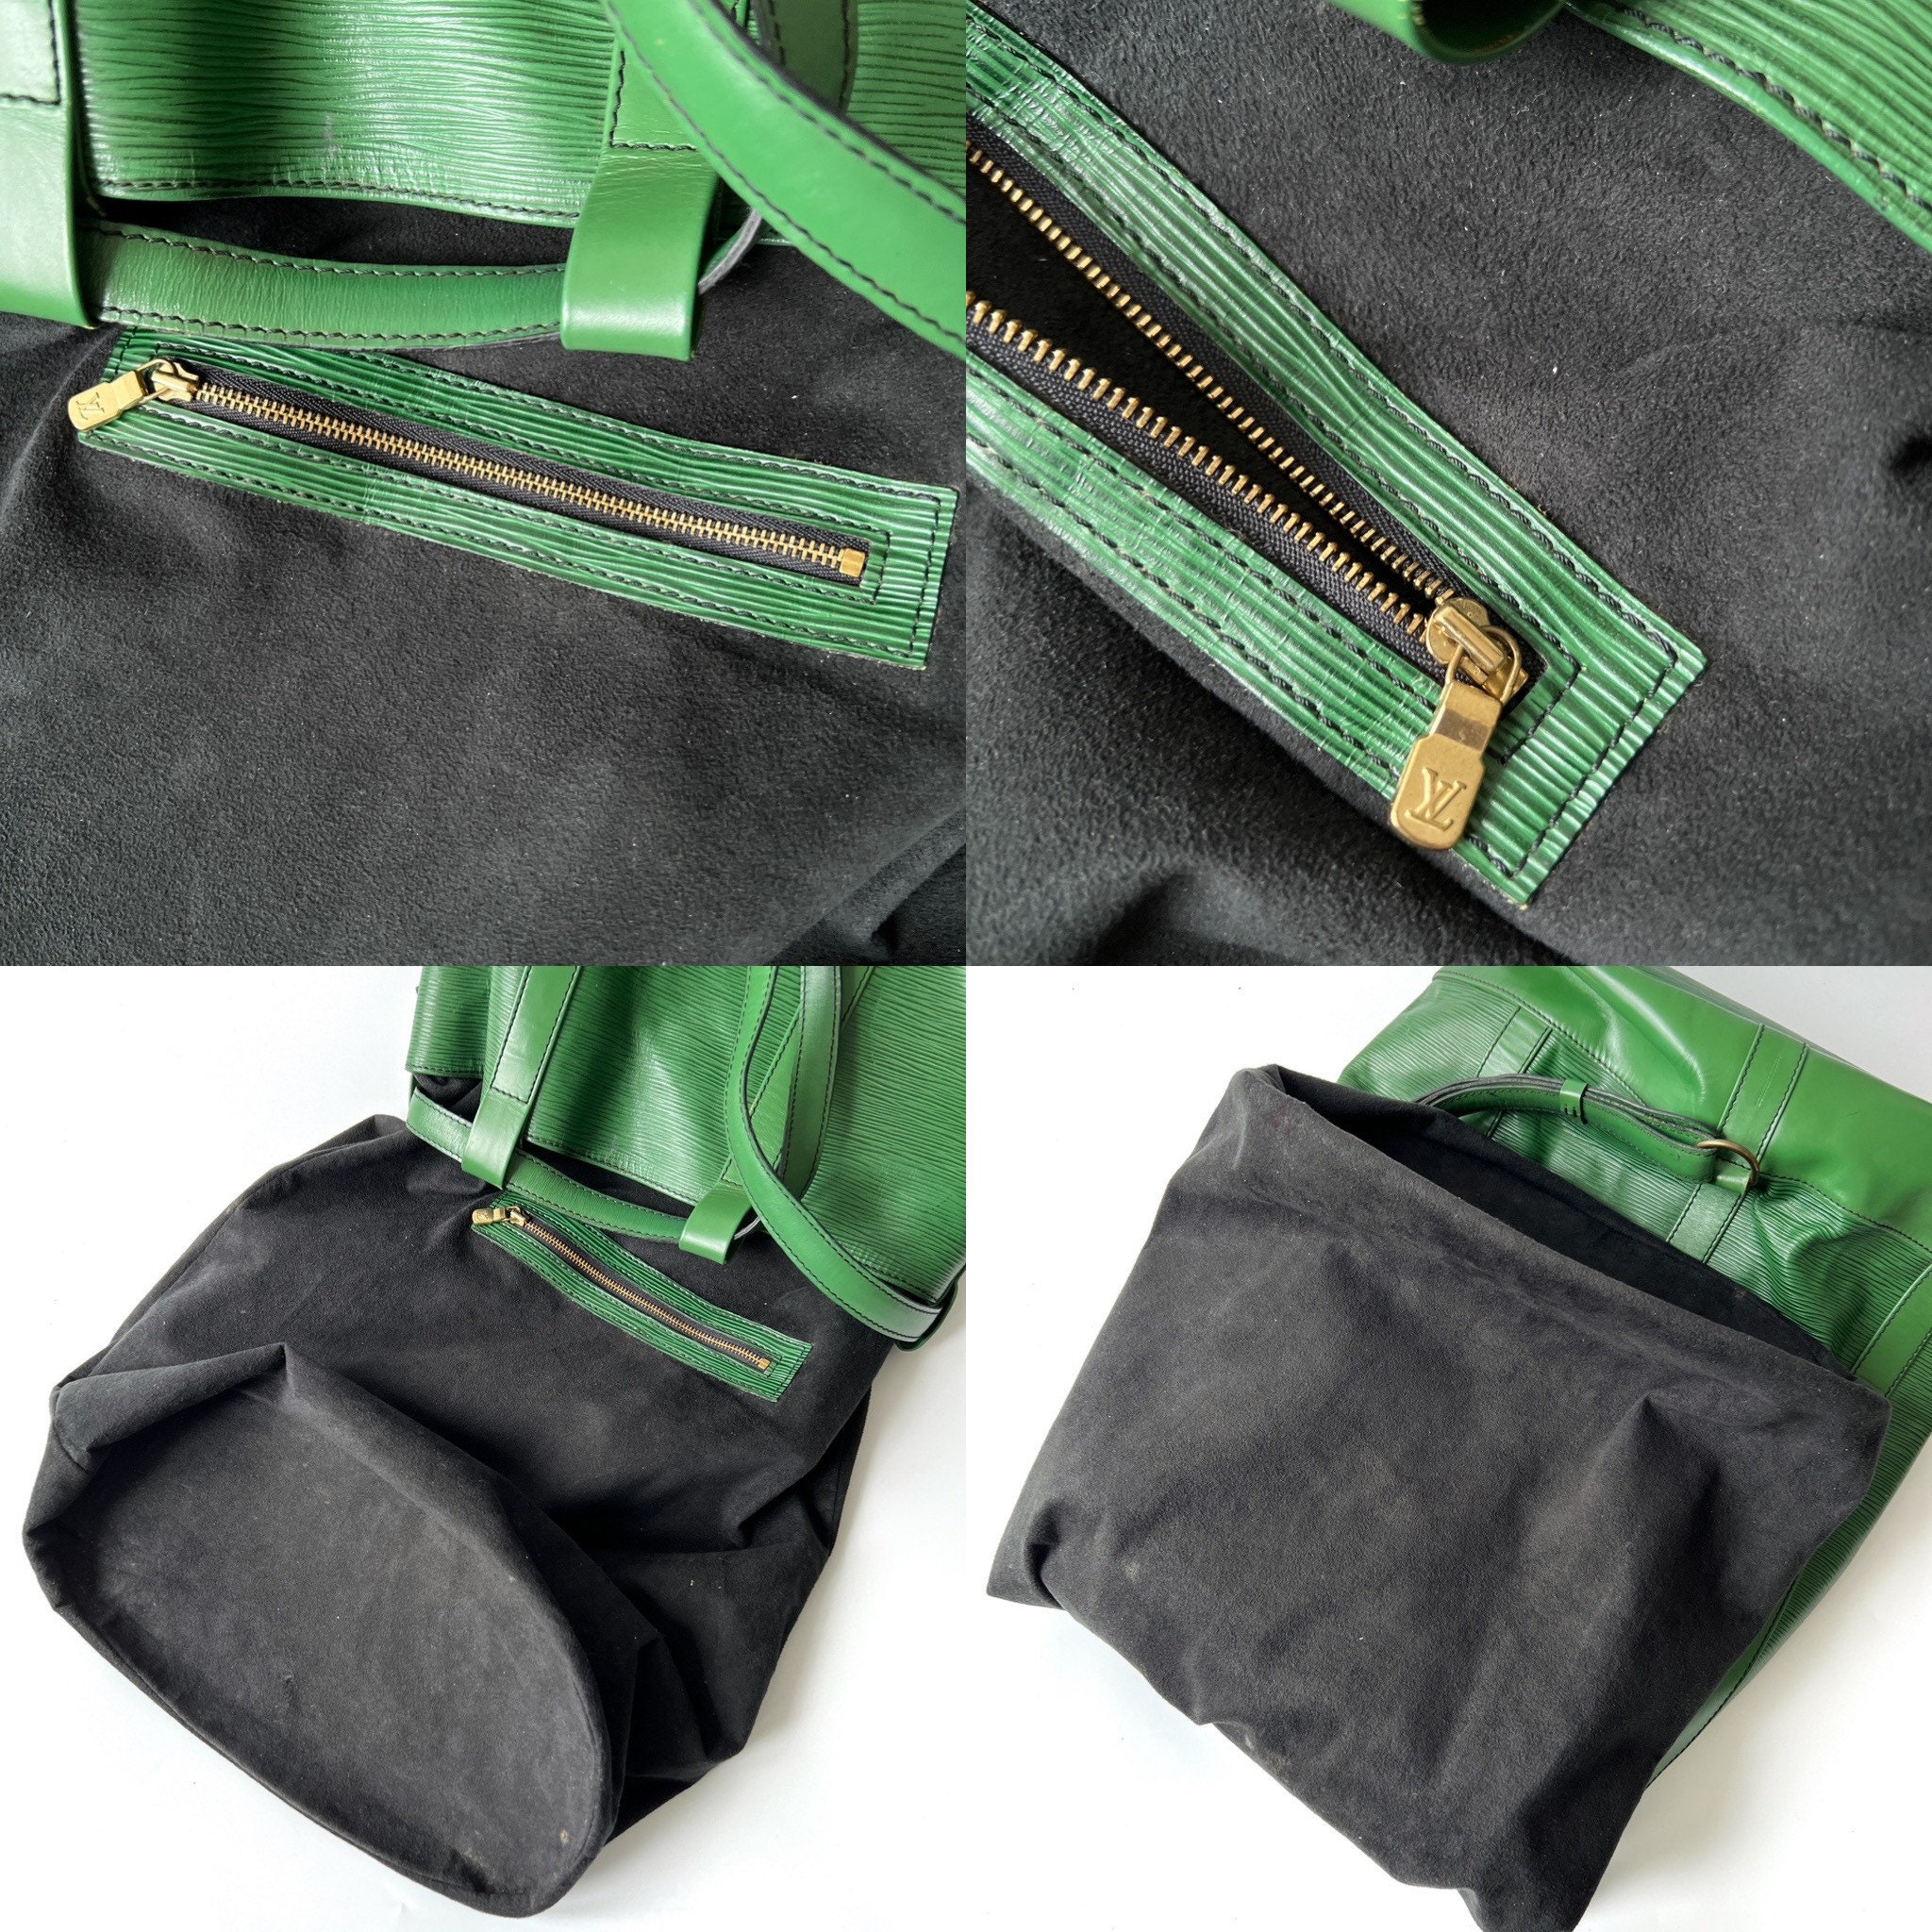 Louis Vuitton Vintage - Epi Randonnee GM - Green - Leather and Epi Leather  Backpack - Luxury High Quality - Avvenice